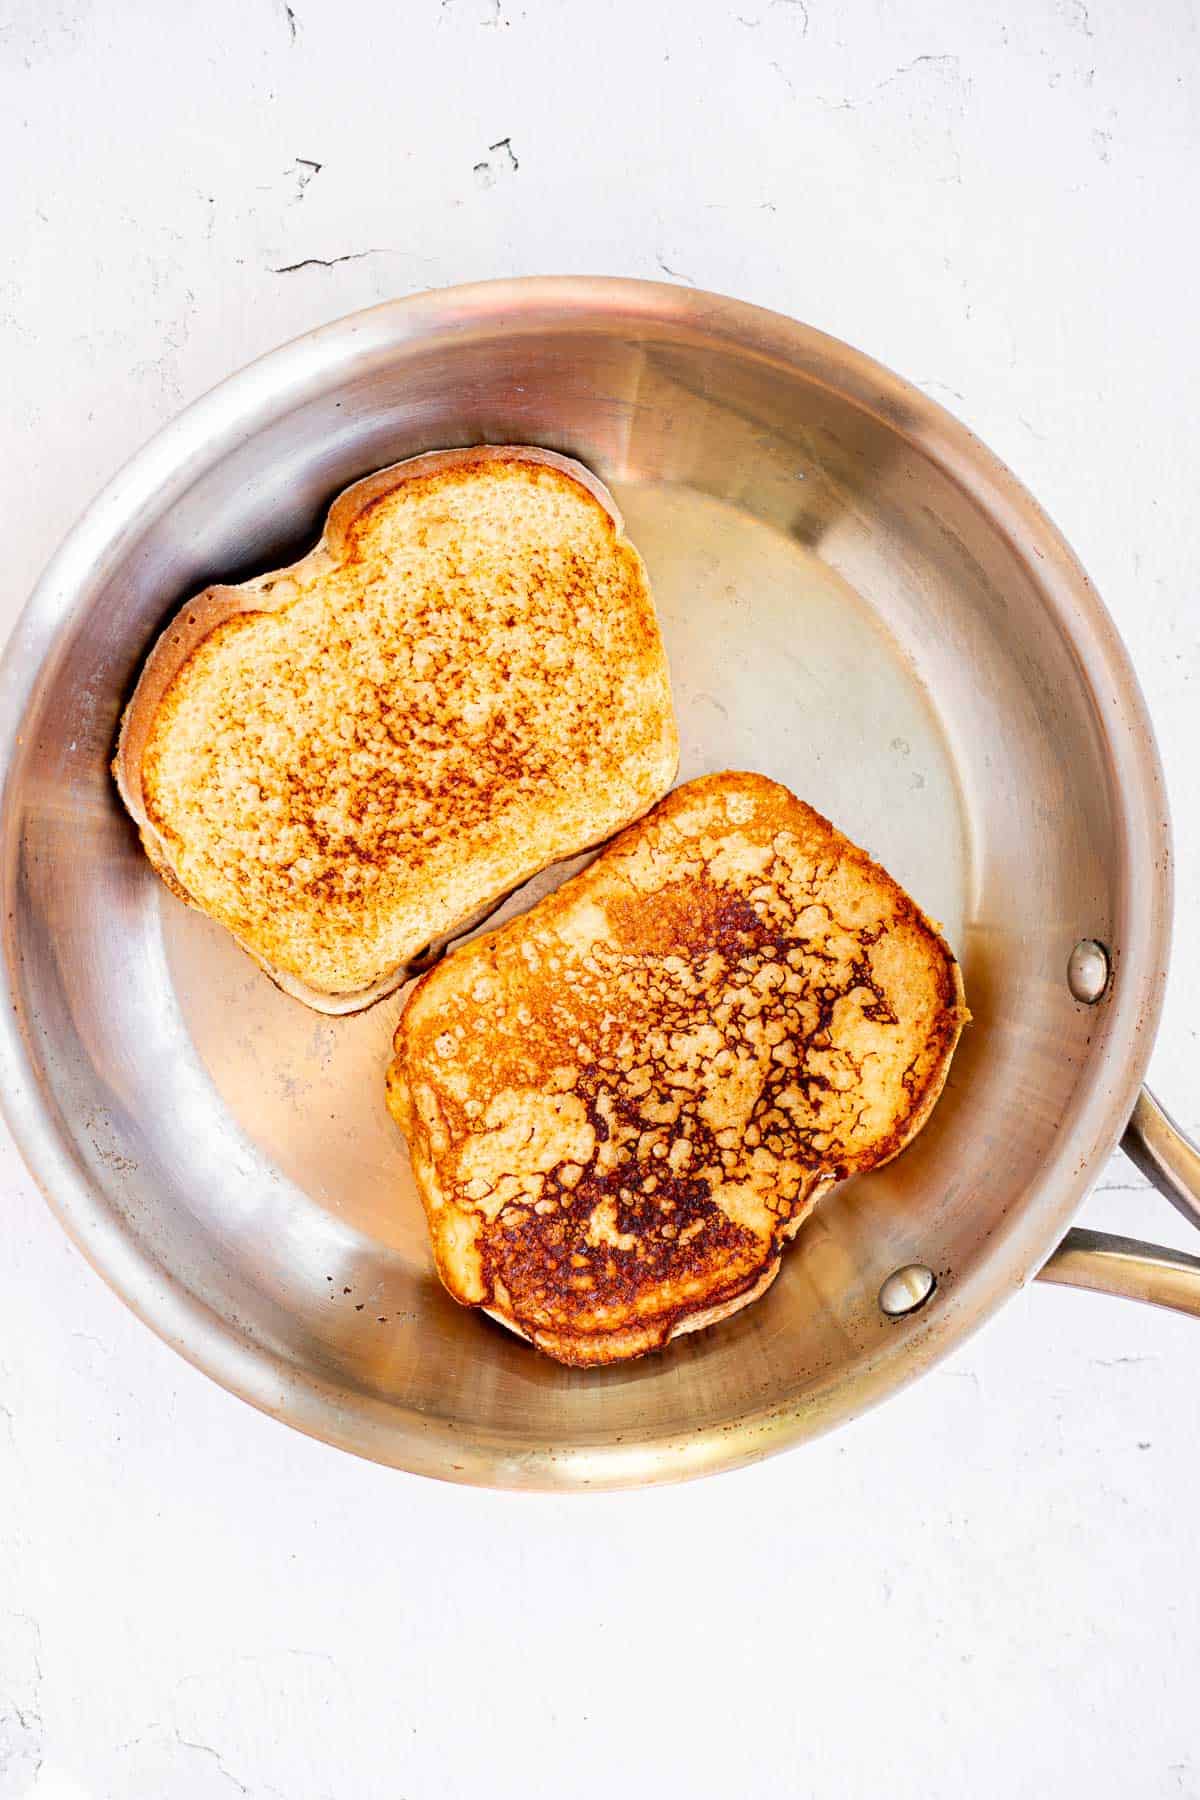 two slices of golden brown protein French toast cooked in a stainless steel plan.